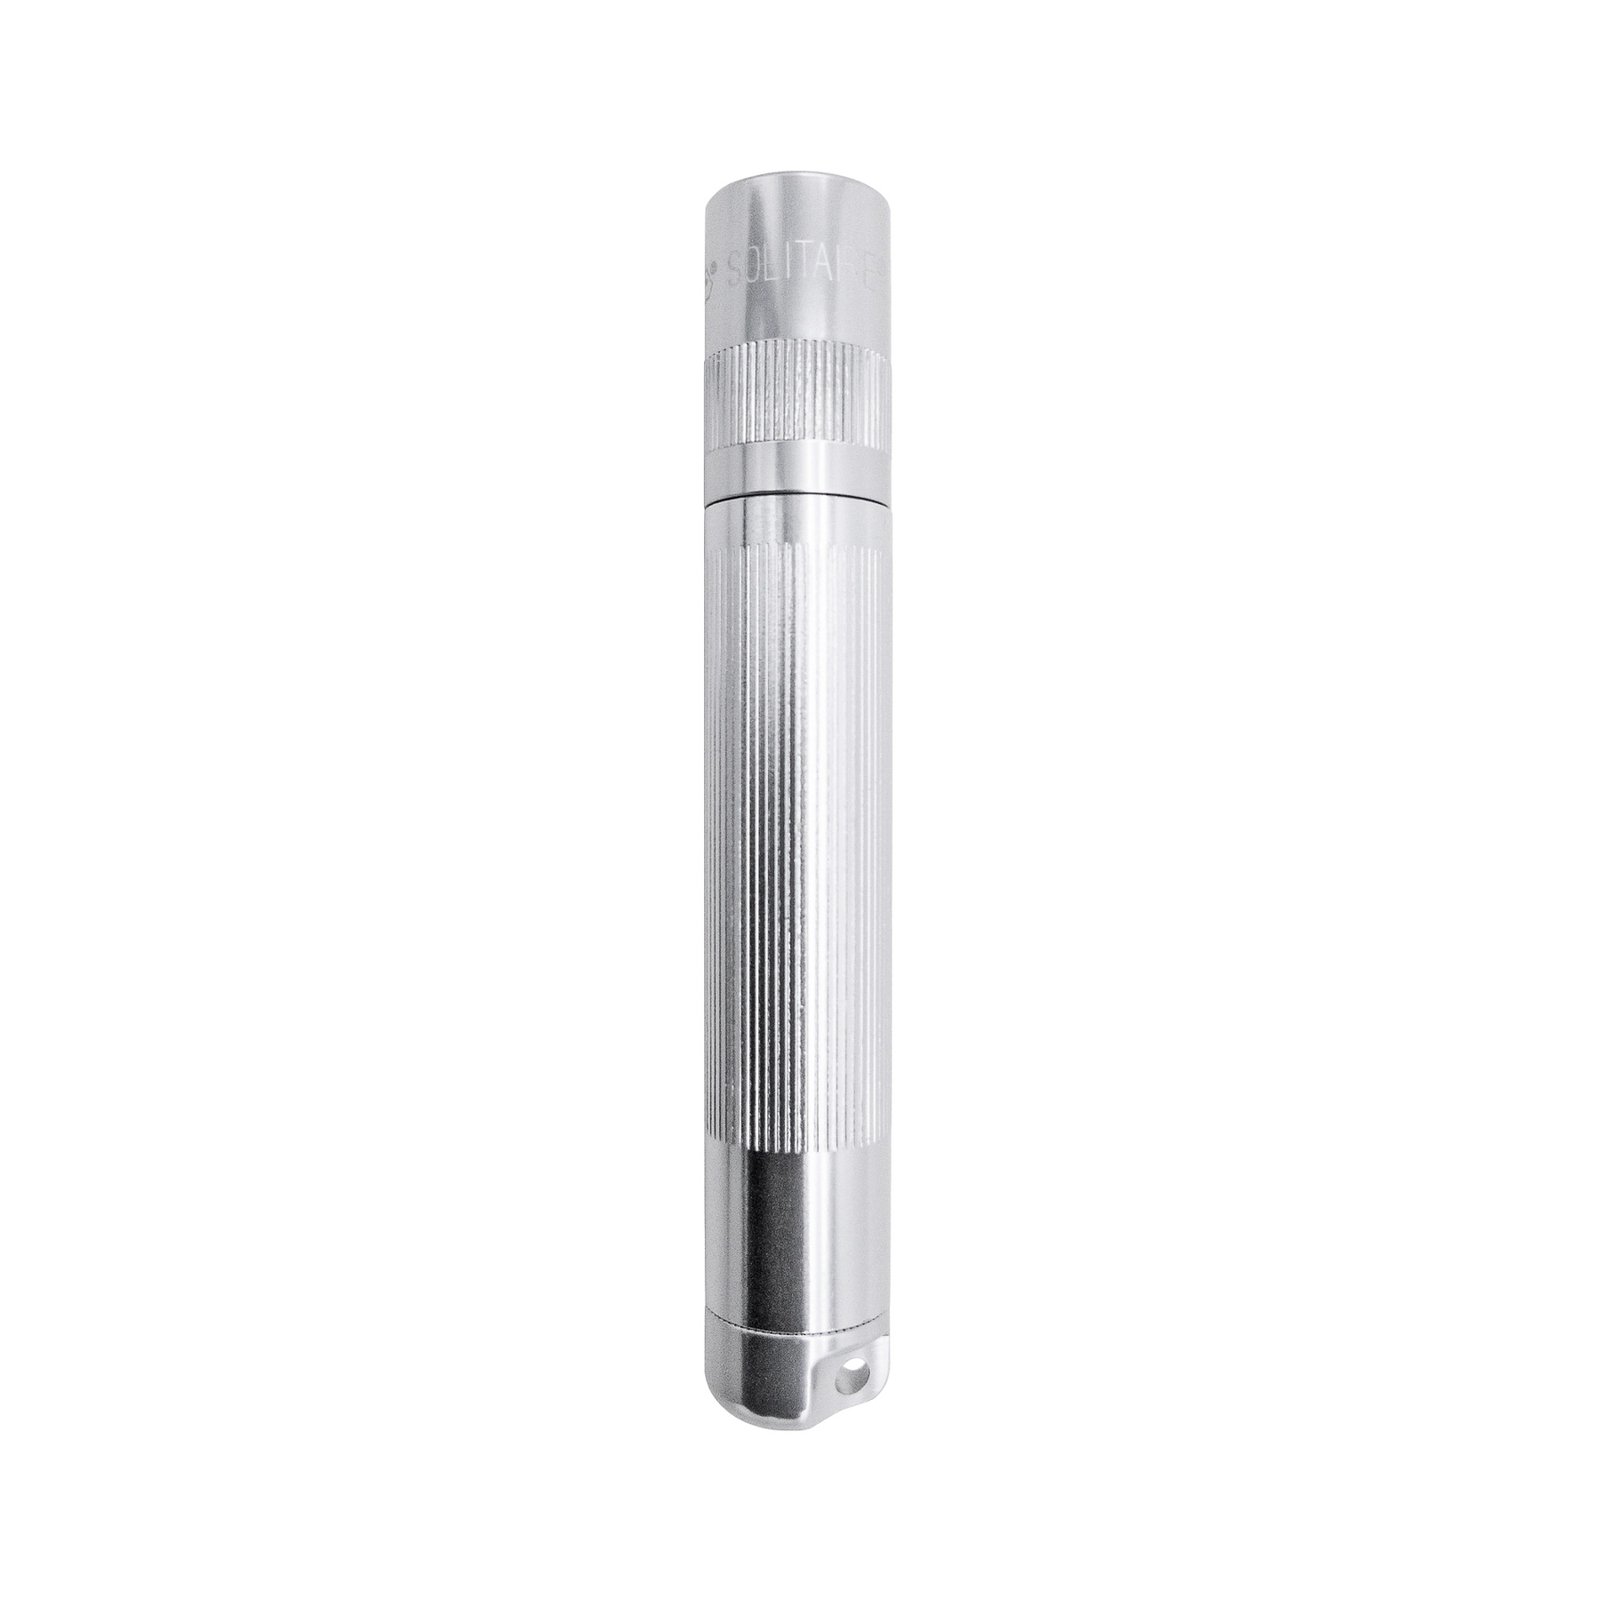 Maglite LED-Taschenlampe Solitaire, 1-Cell AAA, Box, silber